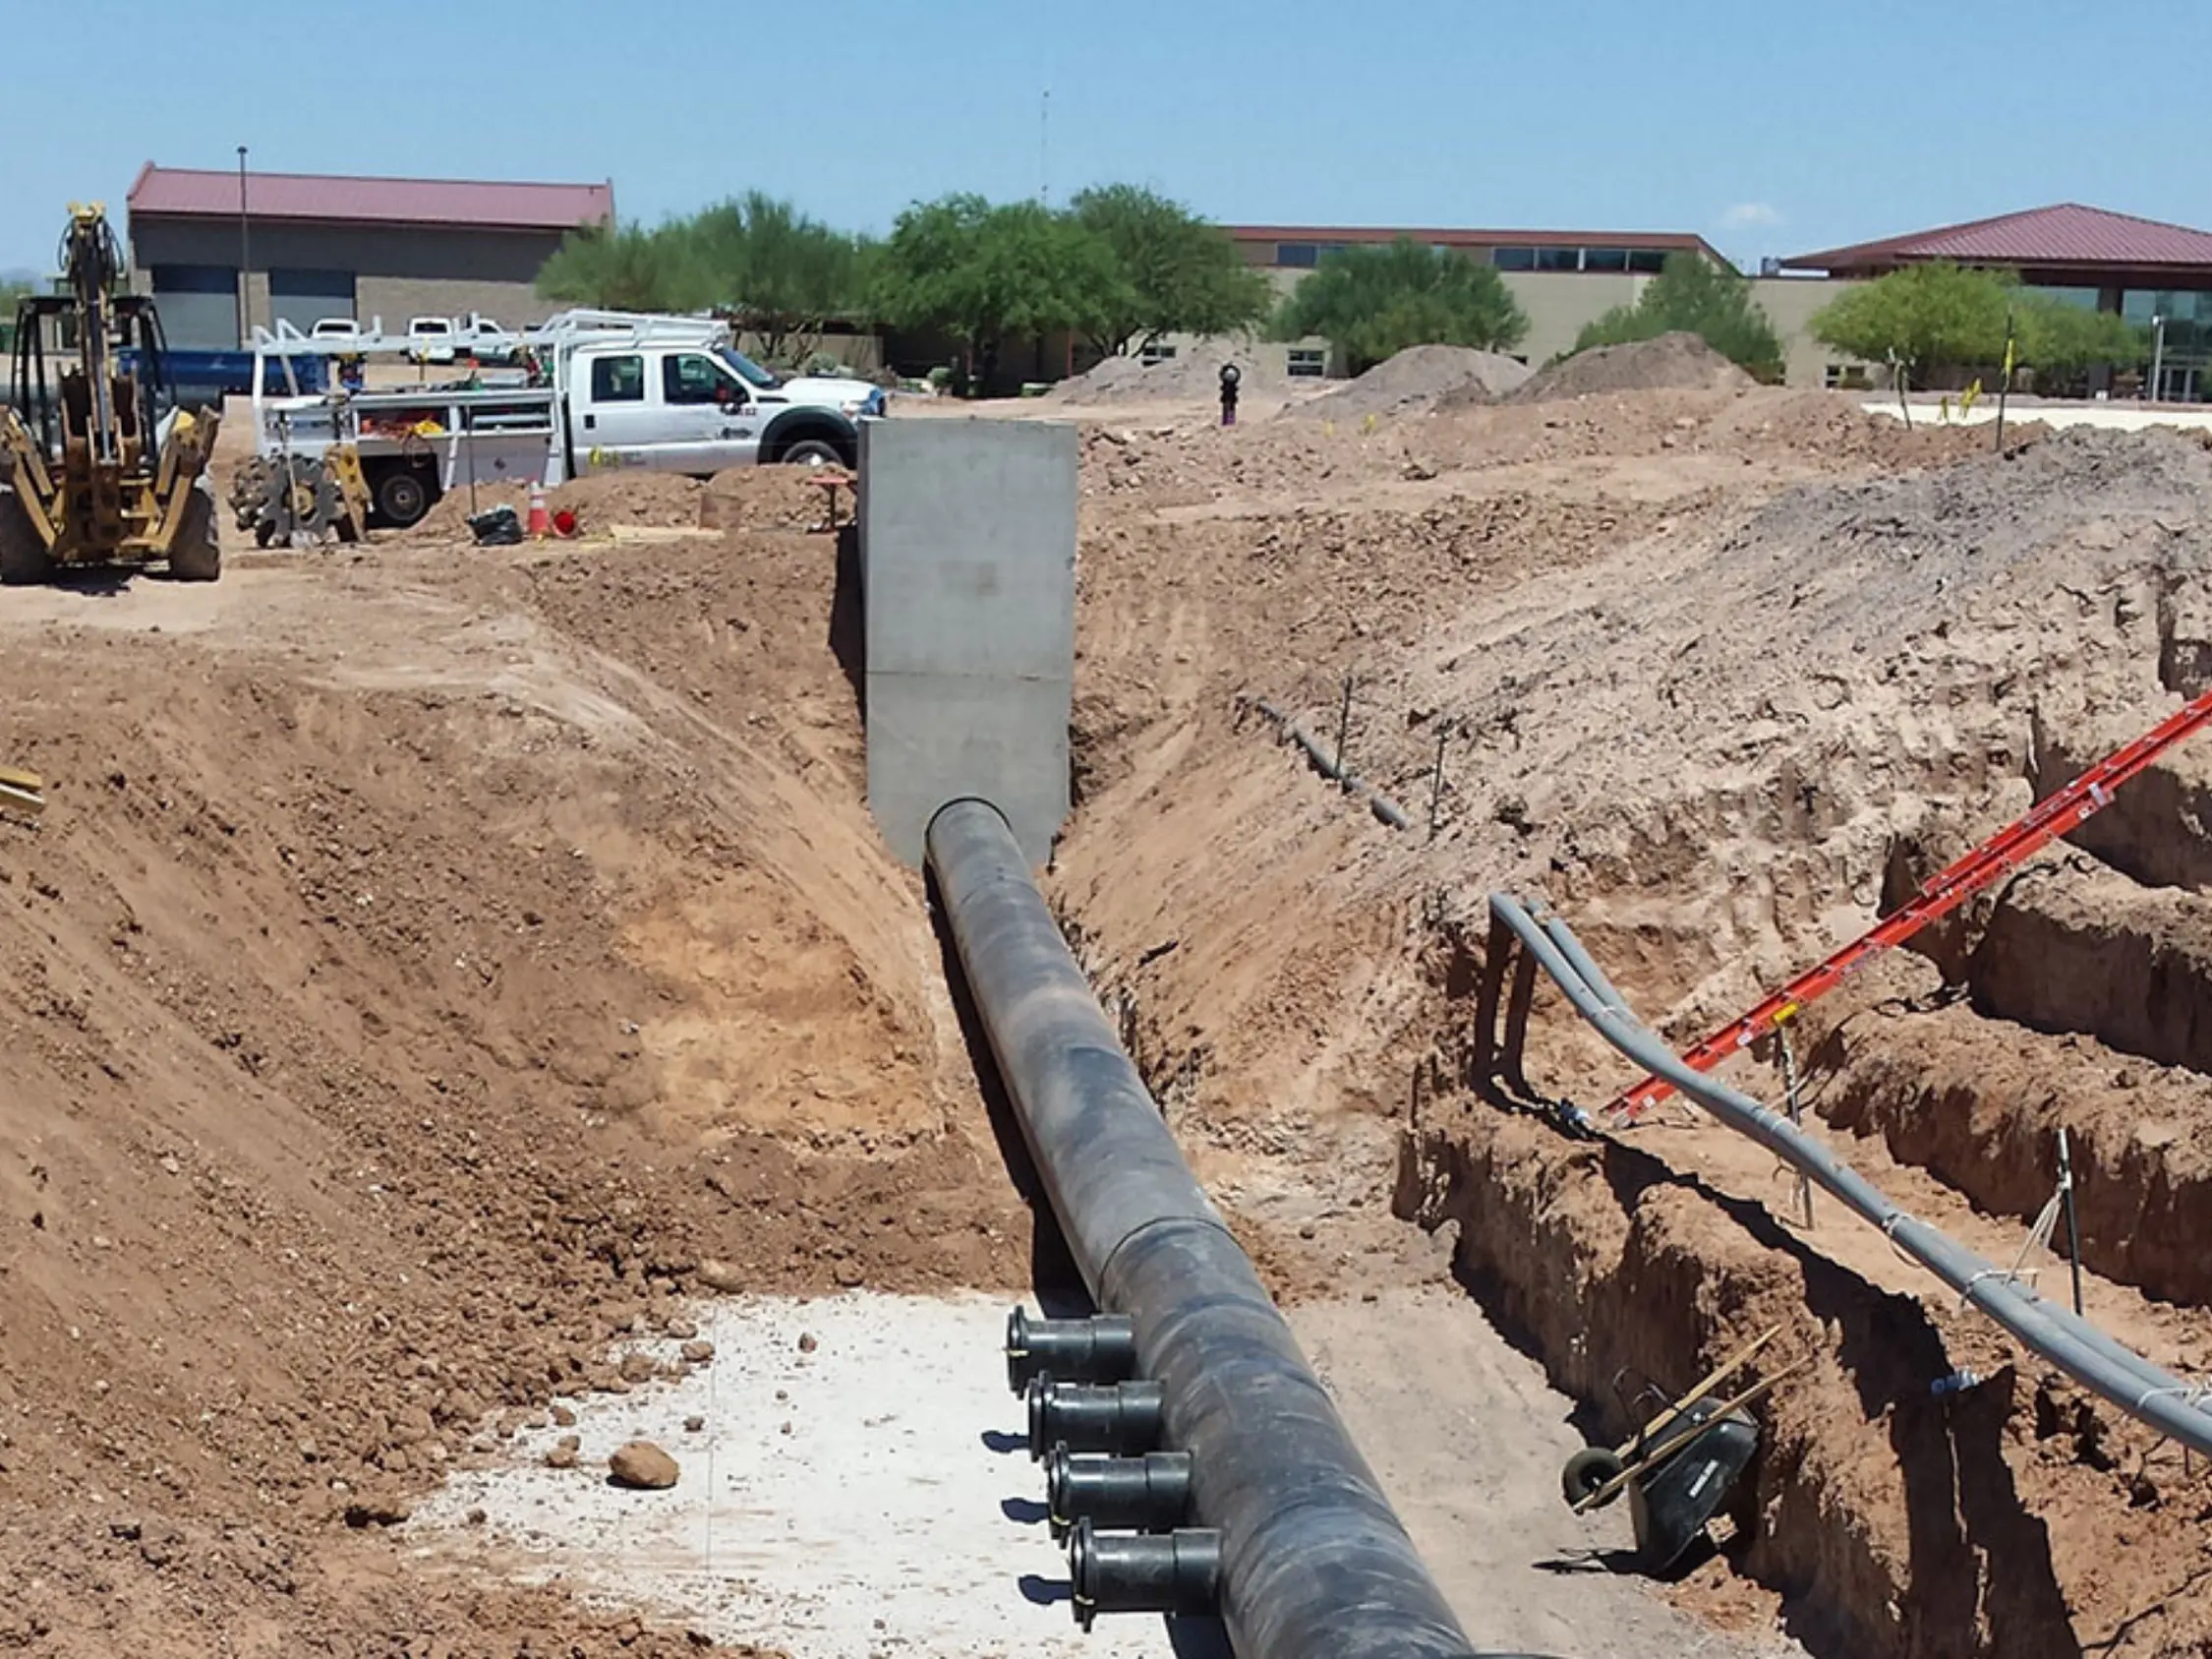 hdpe pipe fusion